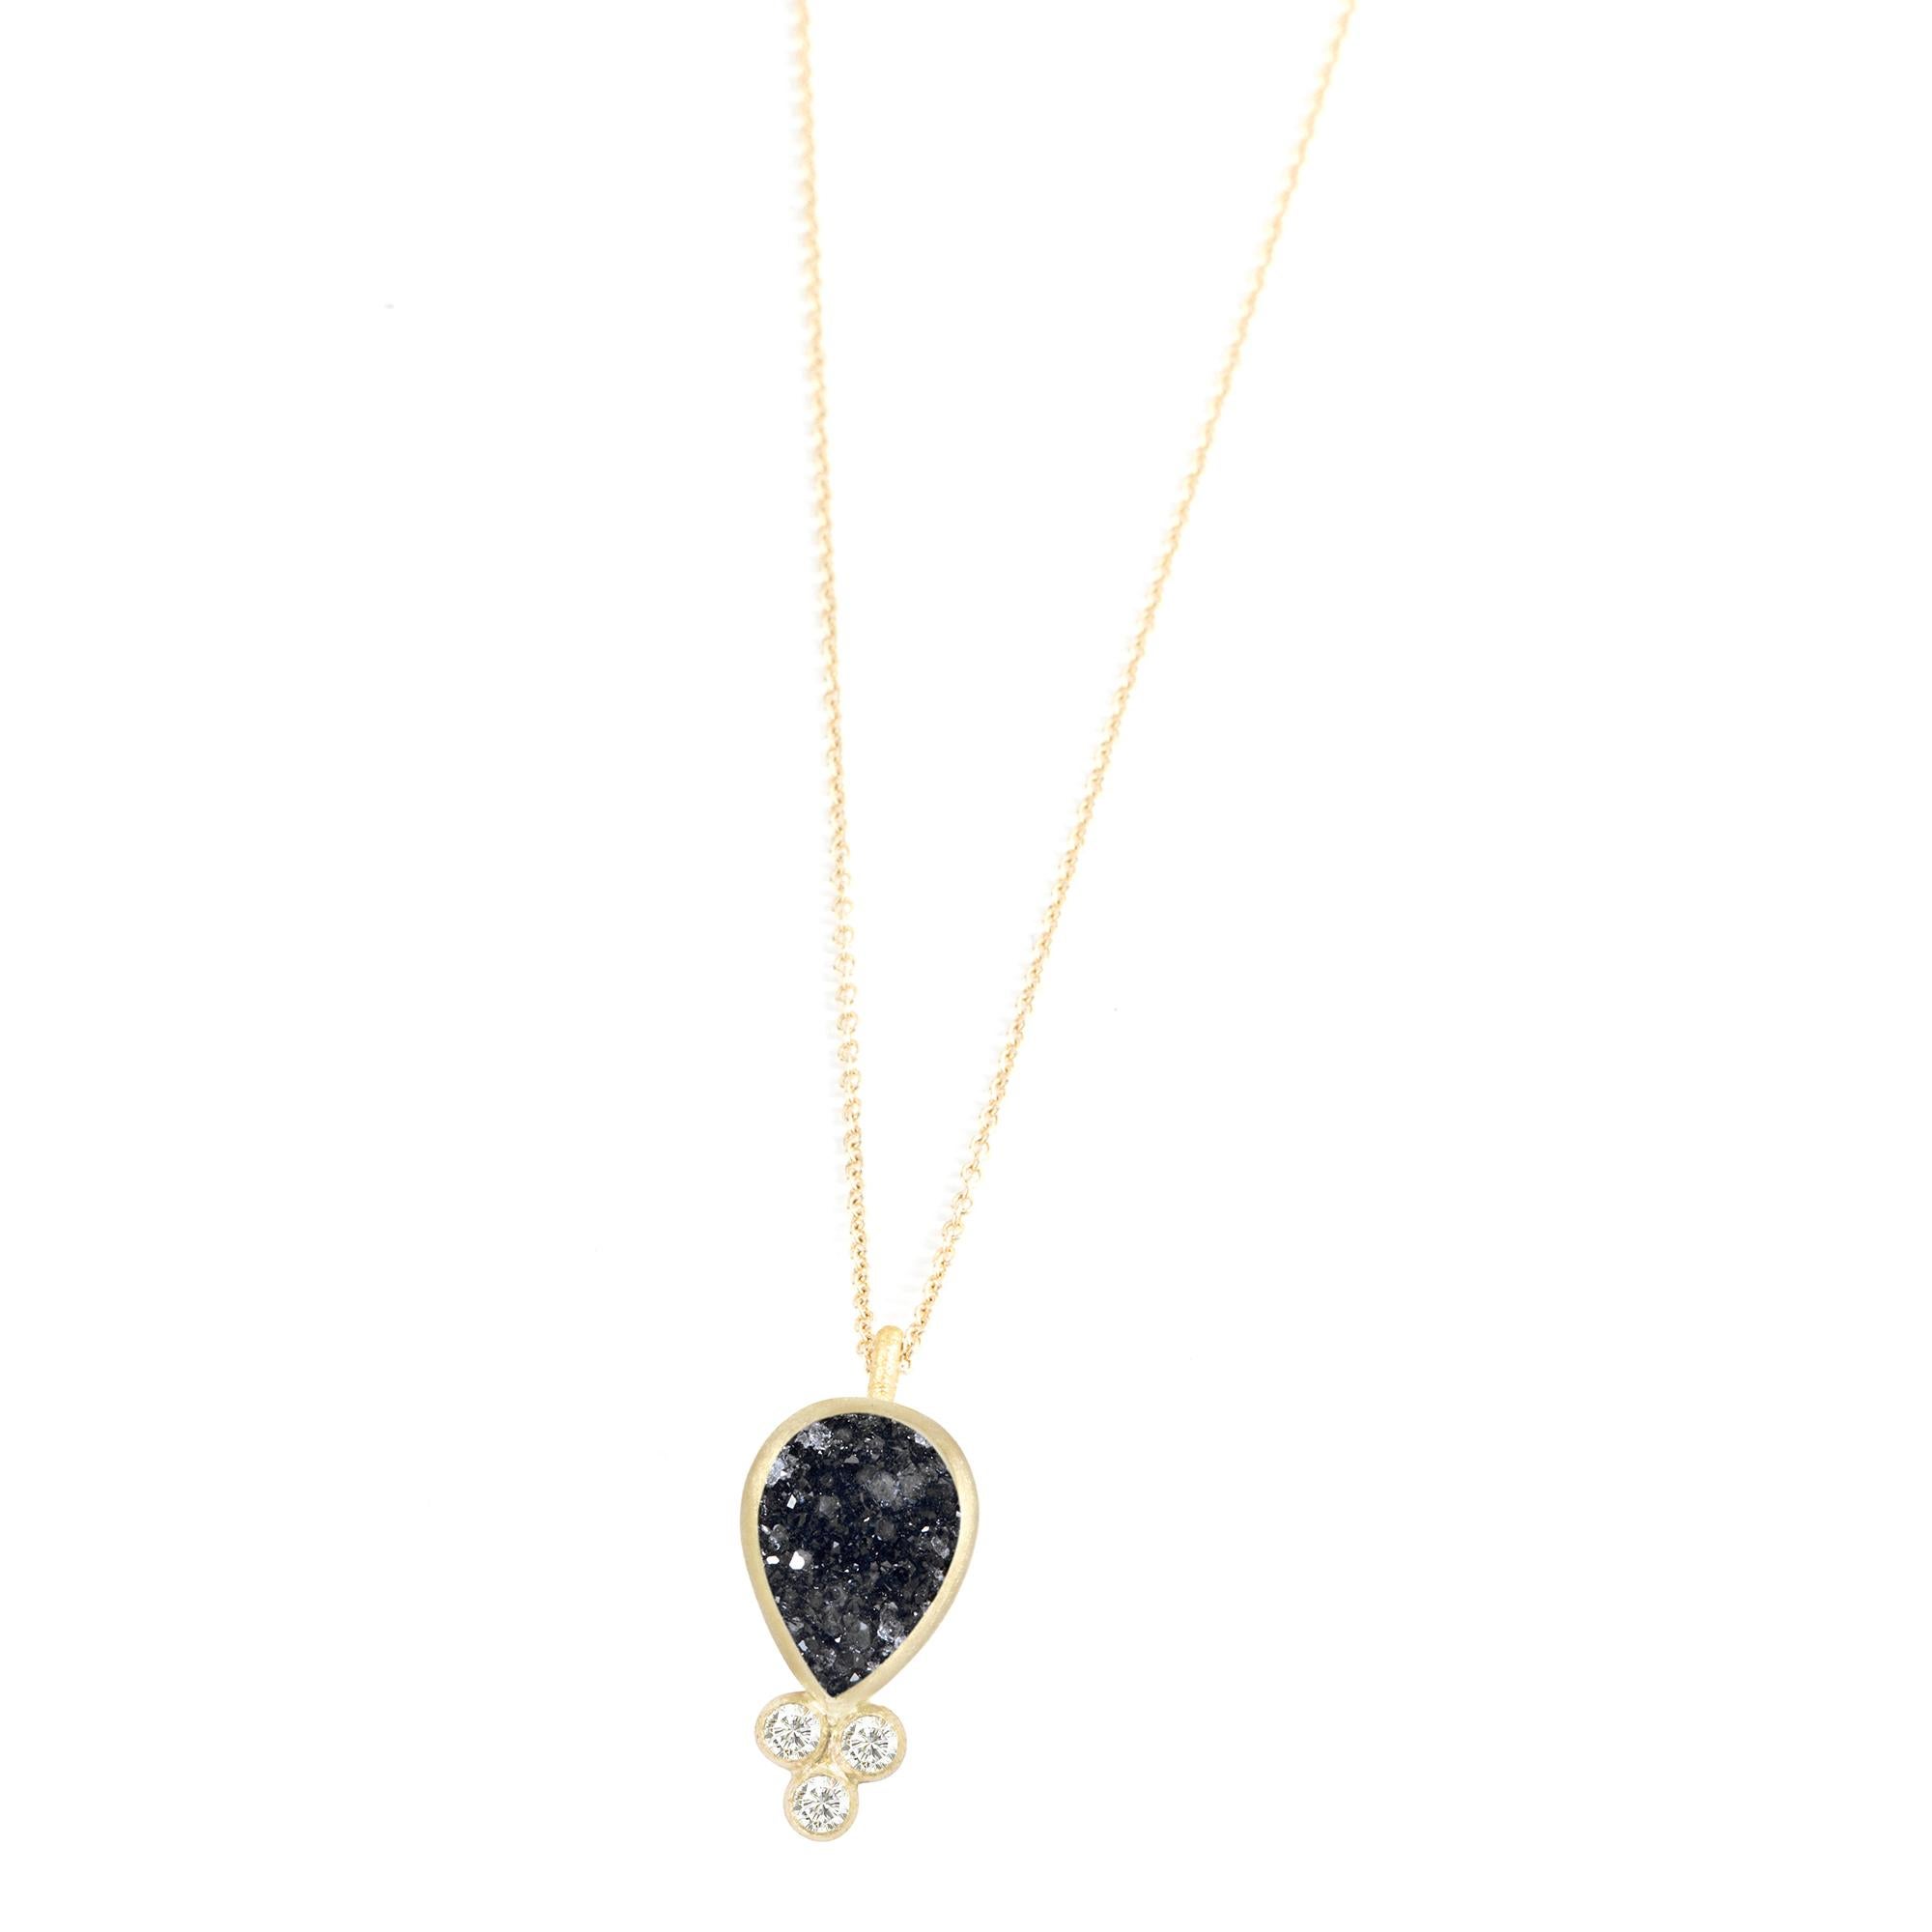 With its single, bezel-set black druzy, the diamond-accented Lilly Gold Necklace is clean and elegant, and a very feminine style you can wear day in, day out.

Stone carat: 2.1
Diamond carat: 0.0225
Length: 16-18''
Stone size: 7x10mm

About The